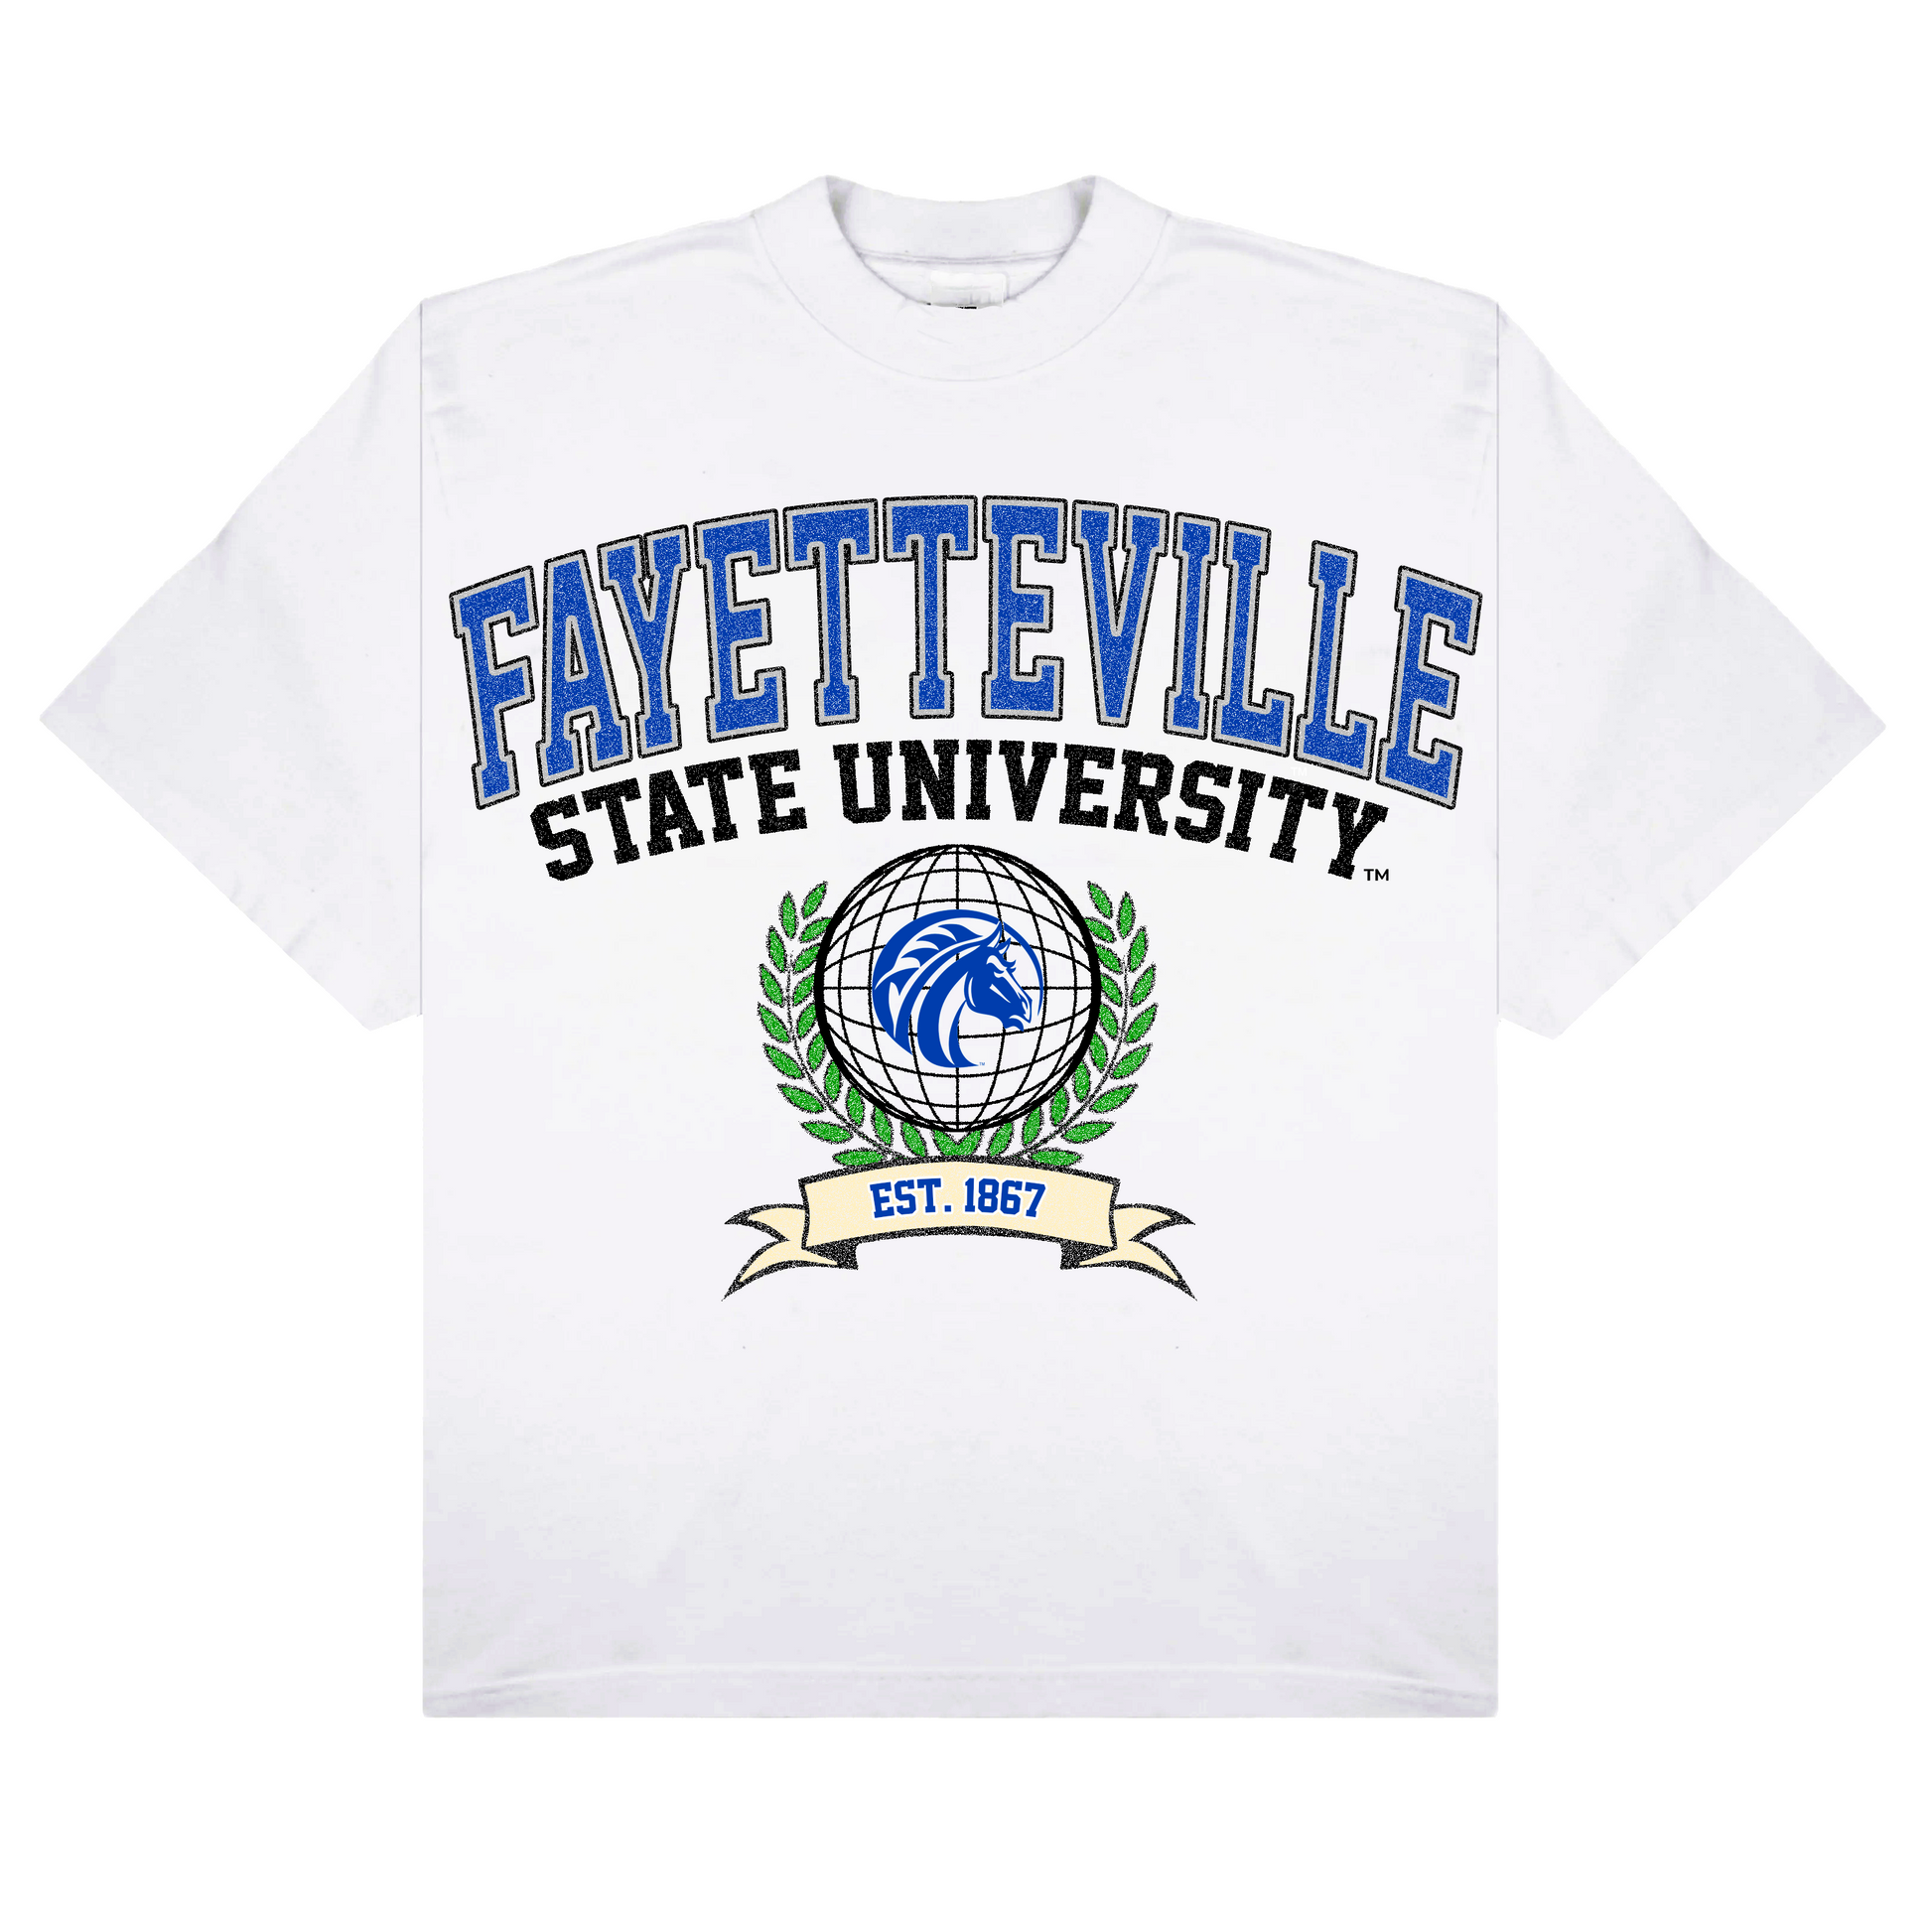 Fayetteville State T-shirt - Fayetteville State Apparel and Clothing - 1921 movement